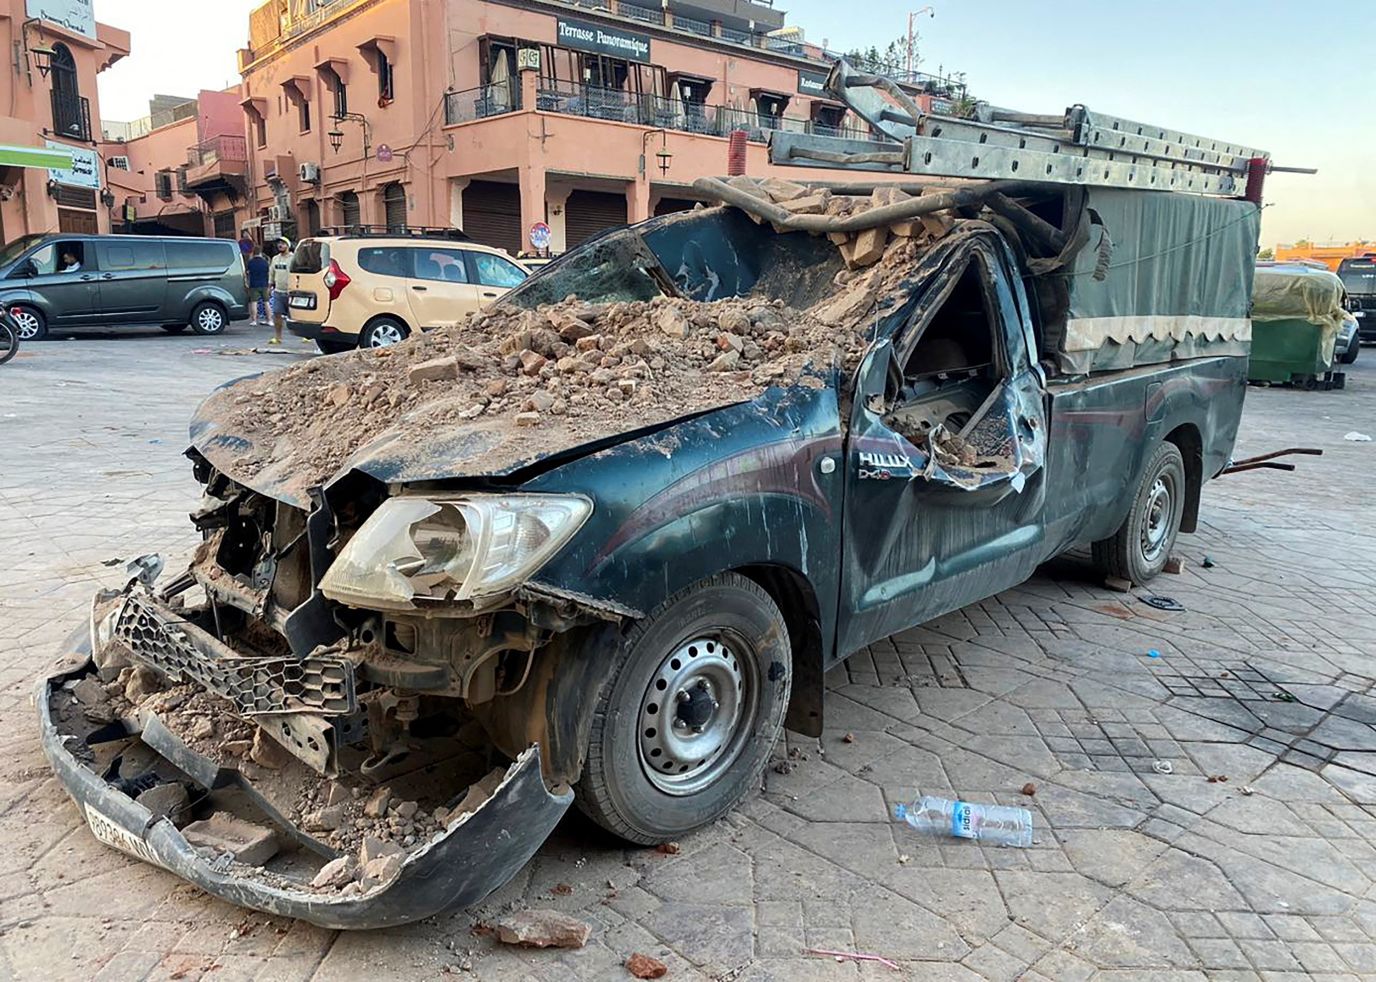 A damaged vehicle sits in a street in Marrakech, Morocco on September 9.